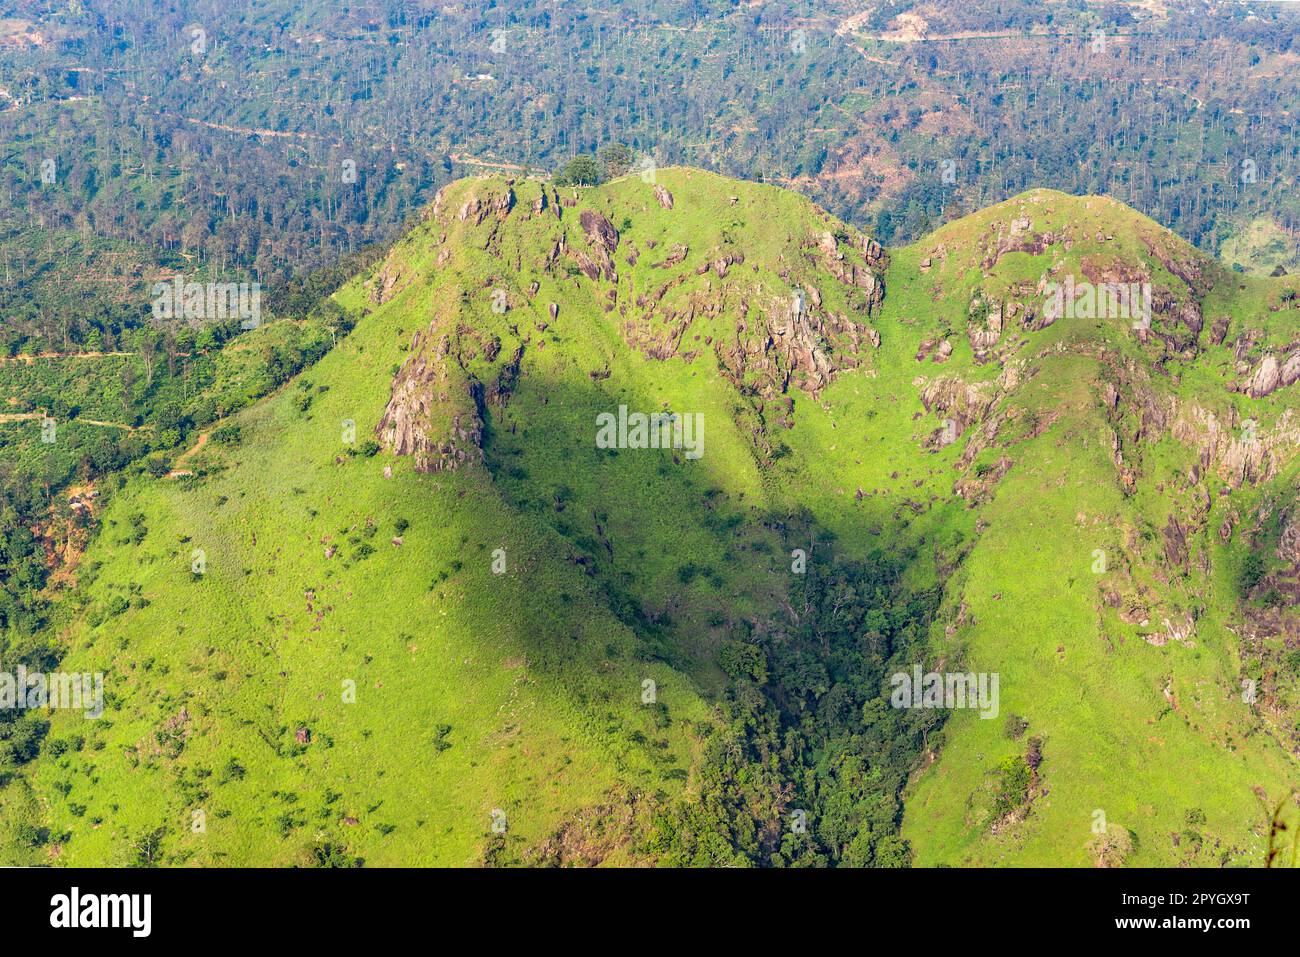 Landscape with little Adams Peak in the hill country of Sri Lanka Stock Photo